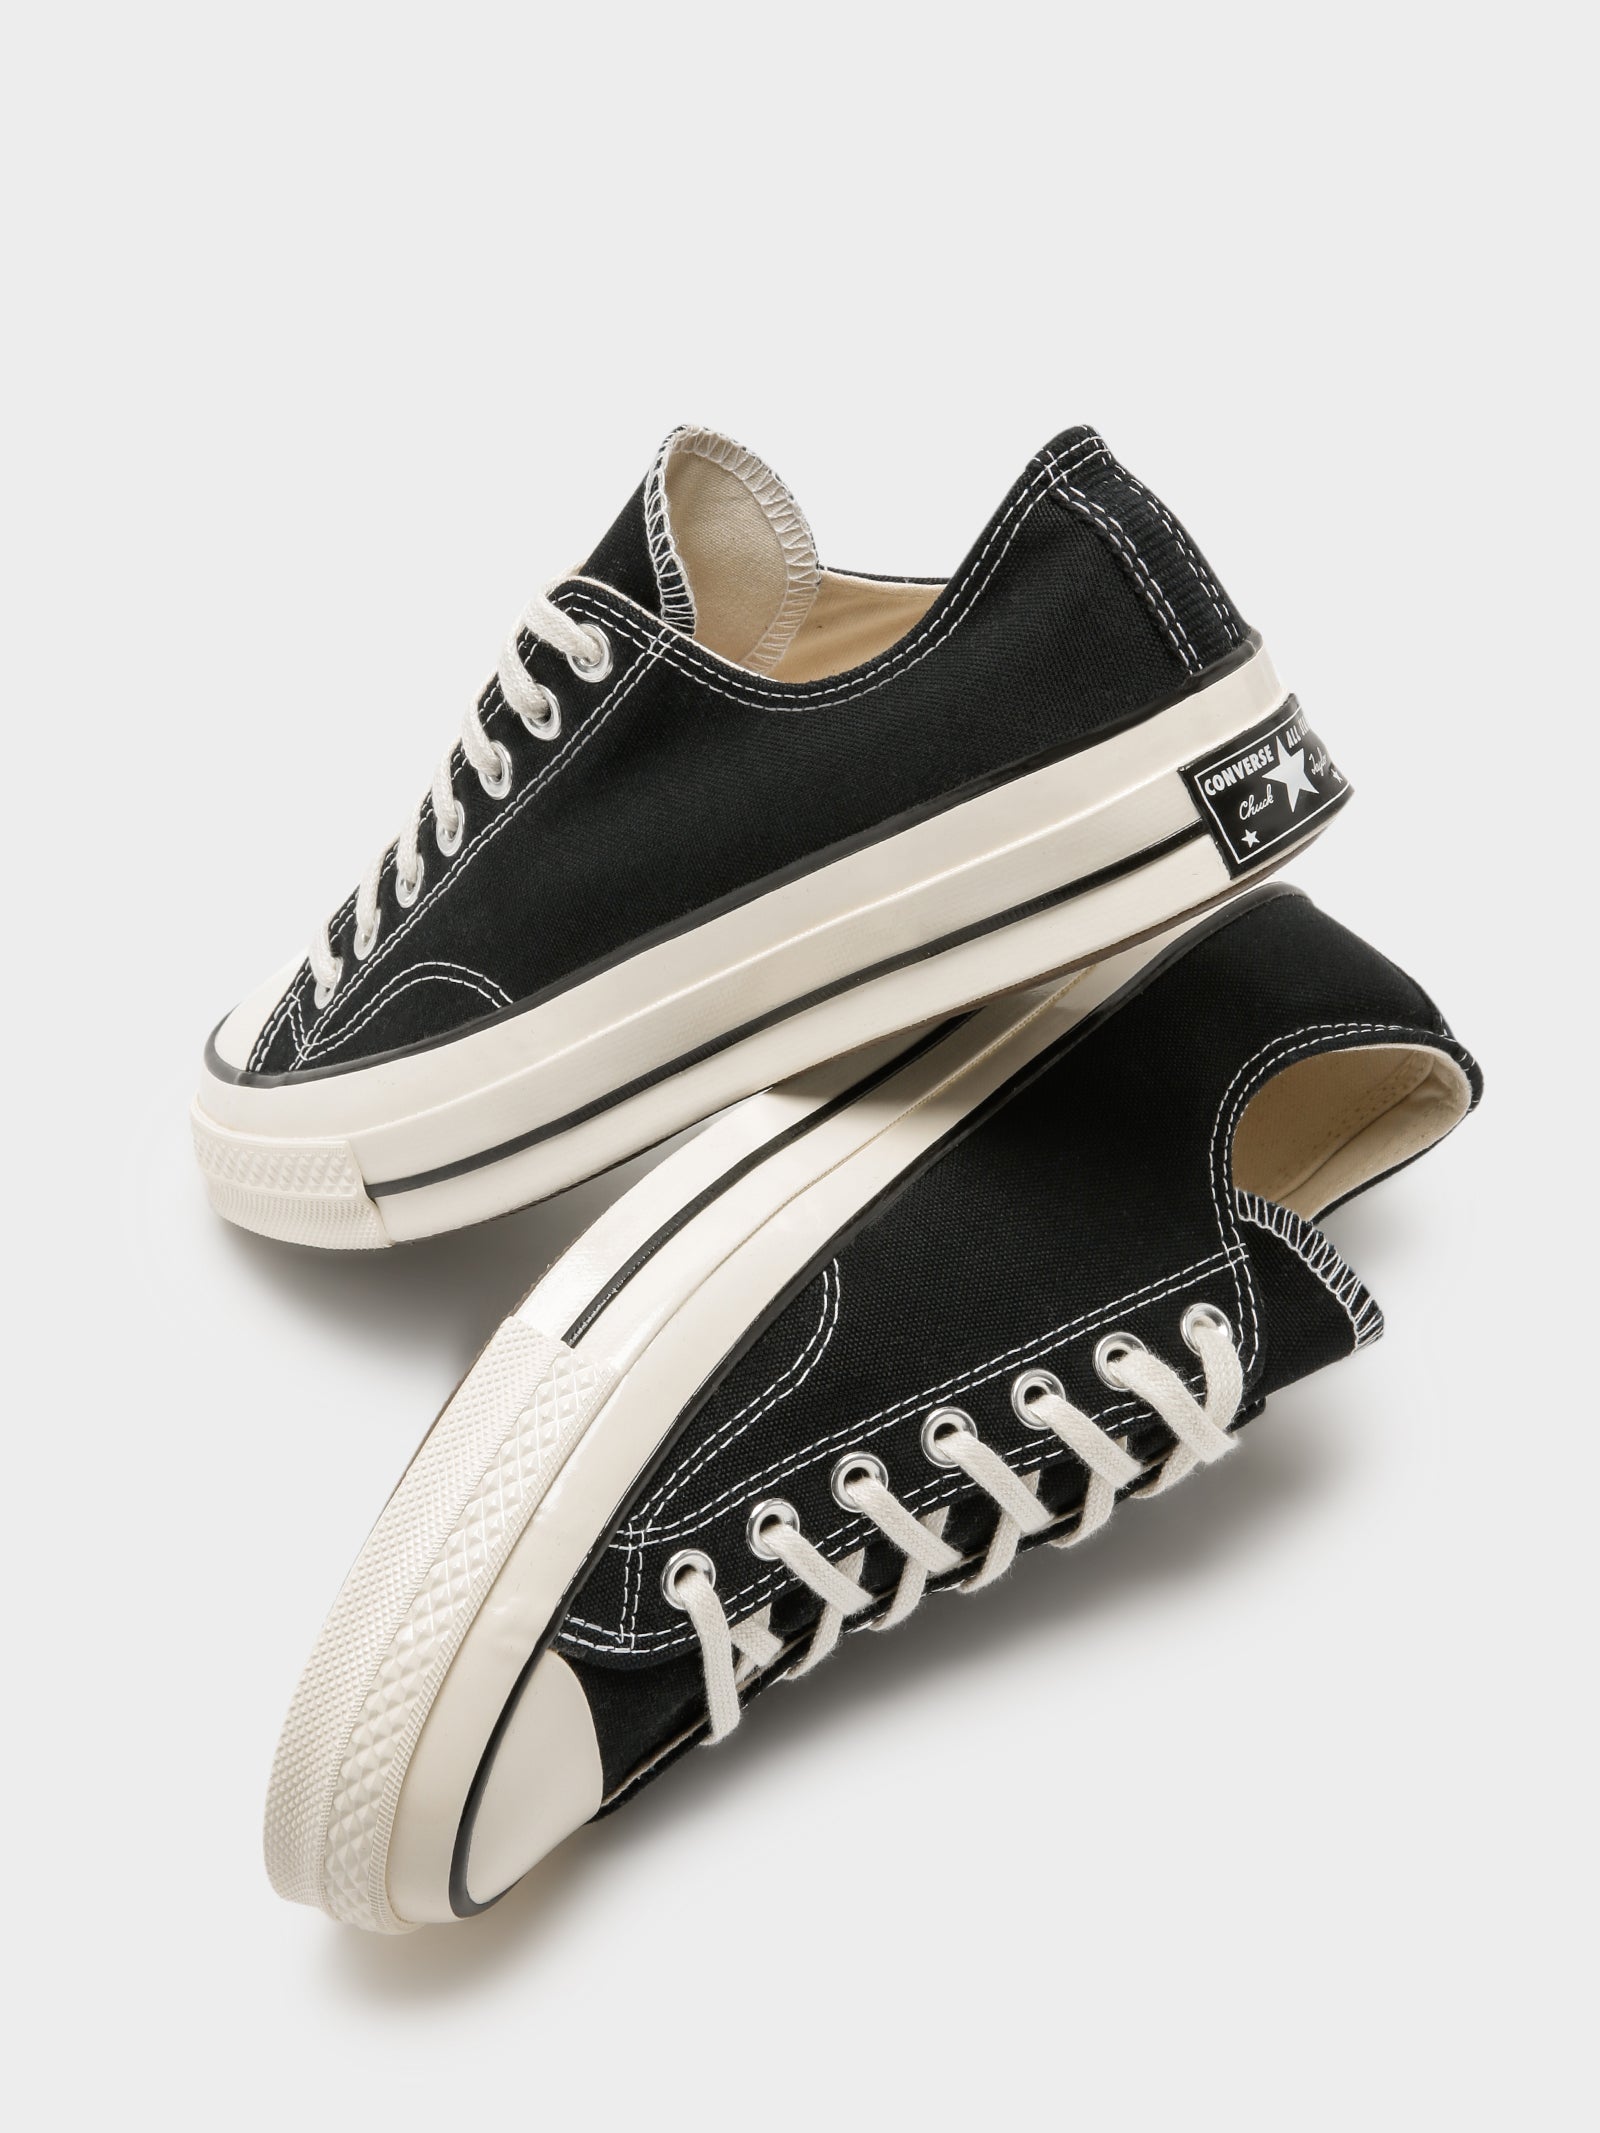 CONVERSE | SIZE: 9 WOMEN'S | CHUCK TAYLOR ALL STAR LOW TOP CHARCOAL | | Chuck  taylor all star, Converse, Chuck taylor sneakers